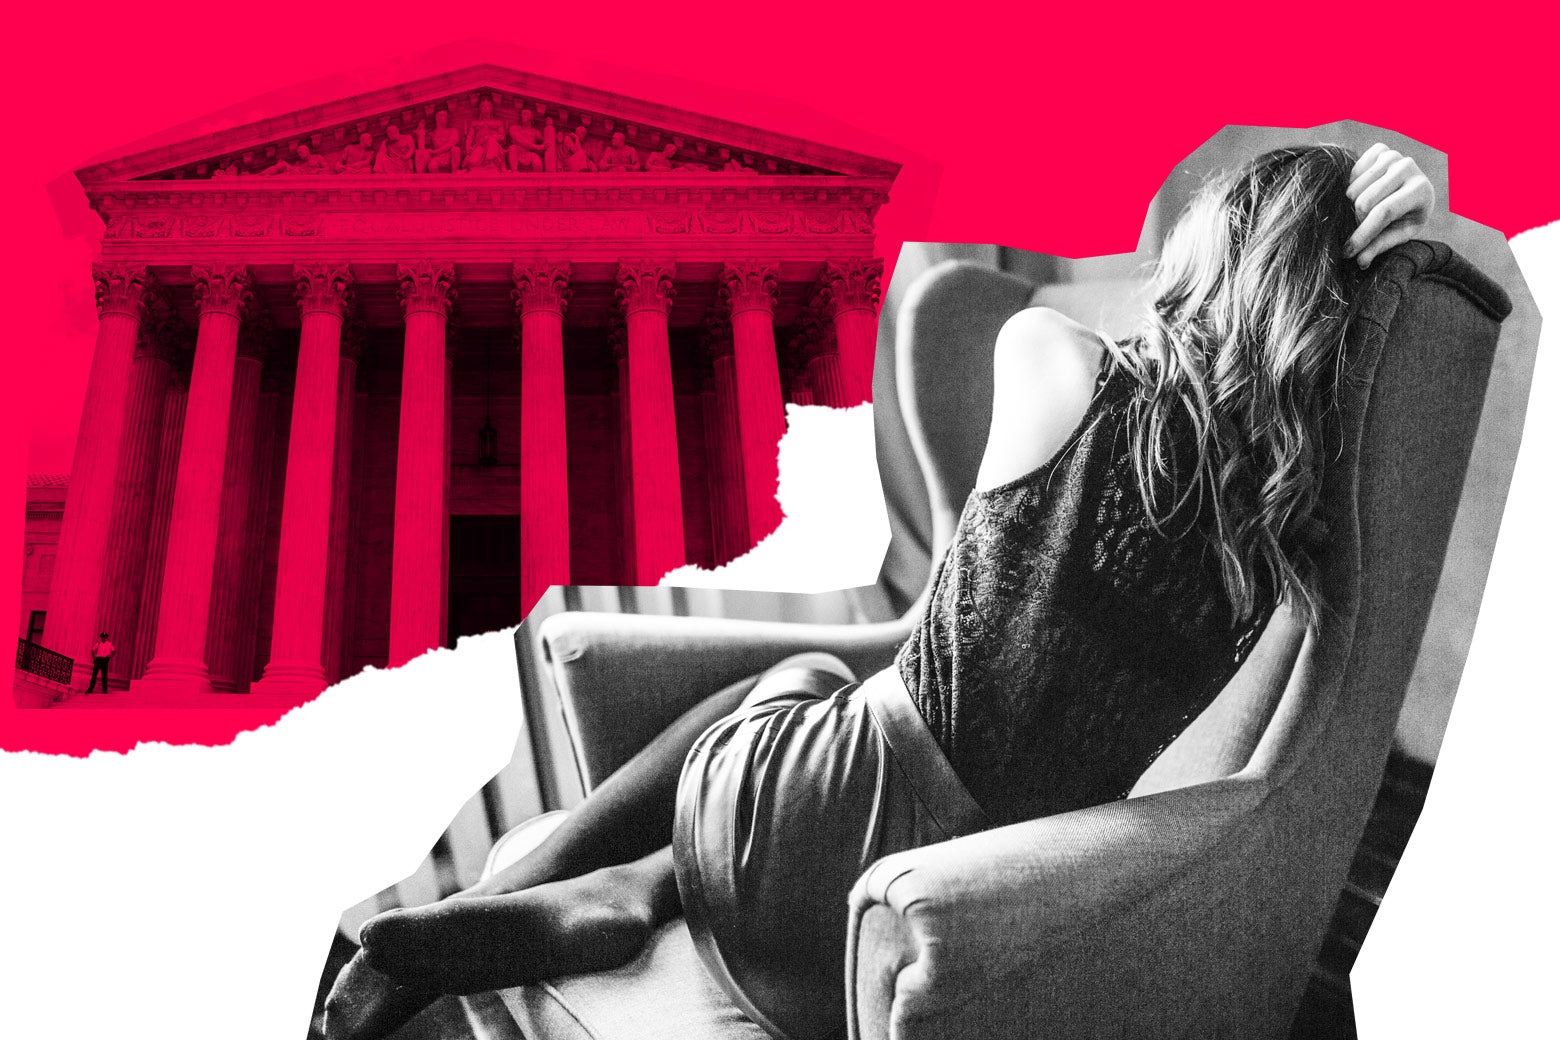 A woman curled up in an armchair, with the Supreme Court building in the background.